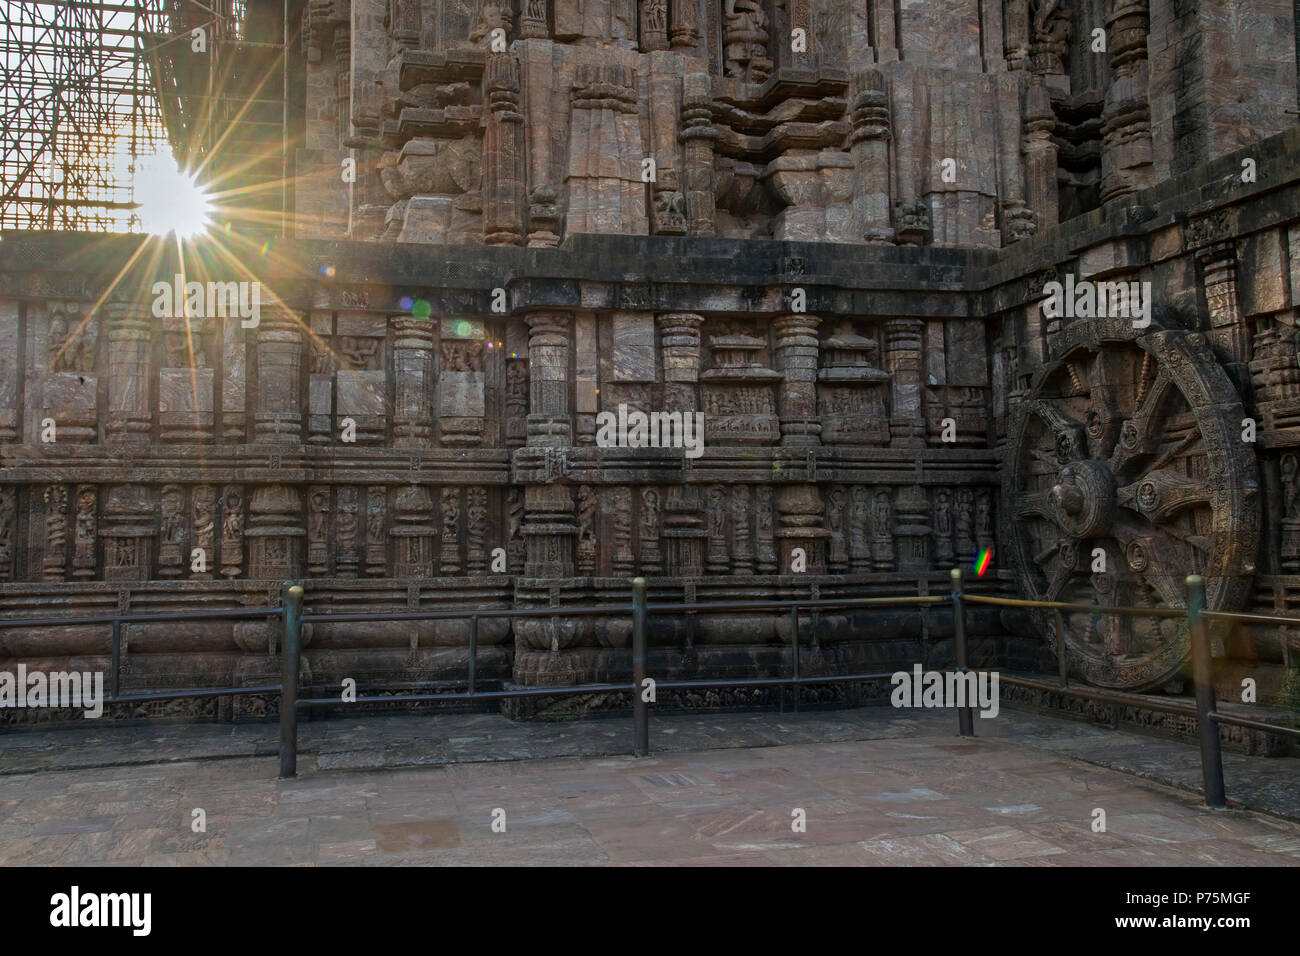 The image of Wheel of Chariot in motion at Konark Sun Temple in Odisha, India Stock Photo